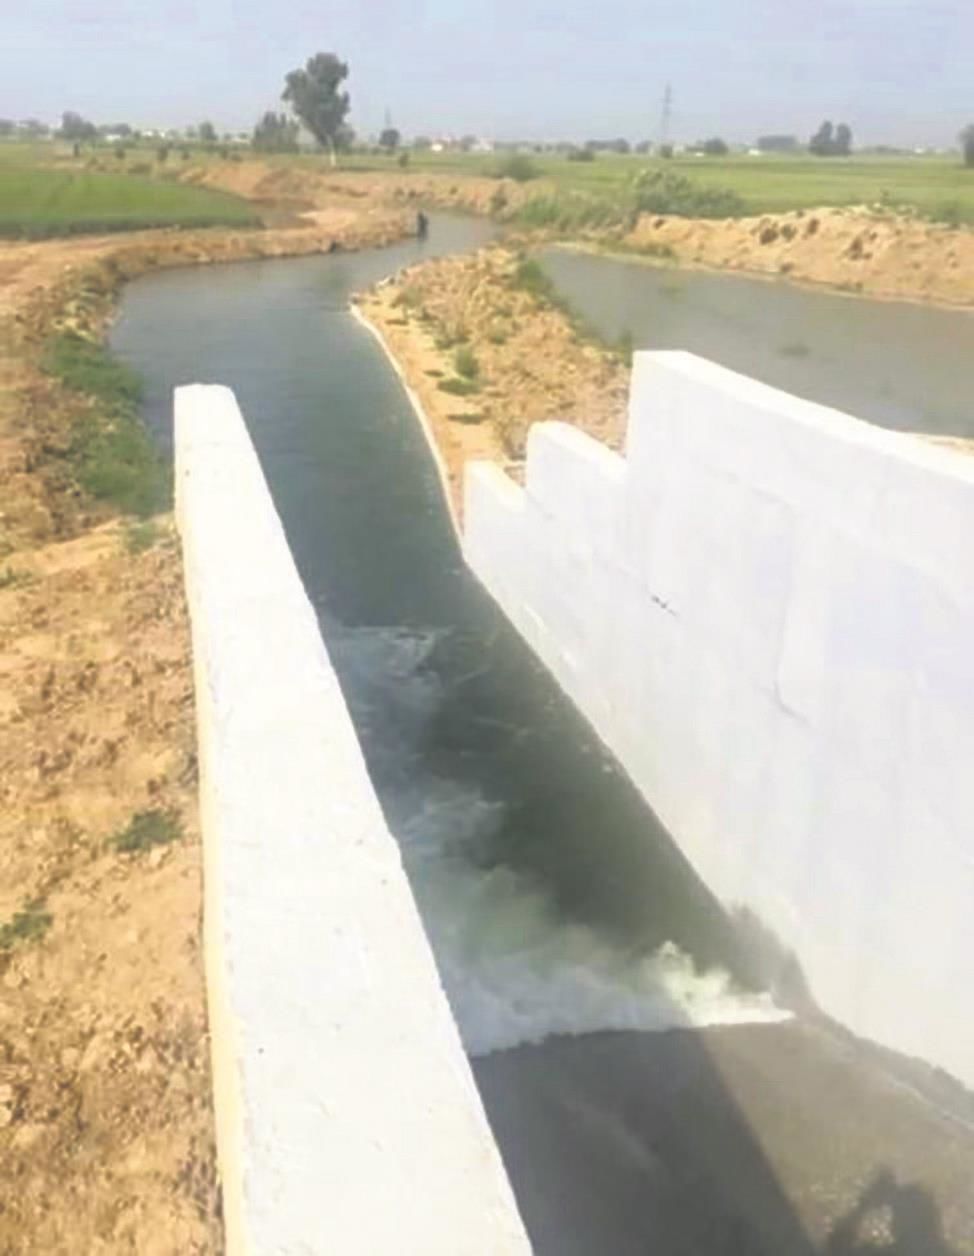 Clean canal water starts flowing into Chitti Bein